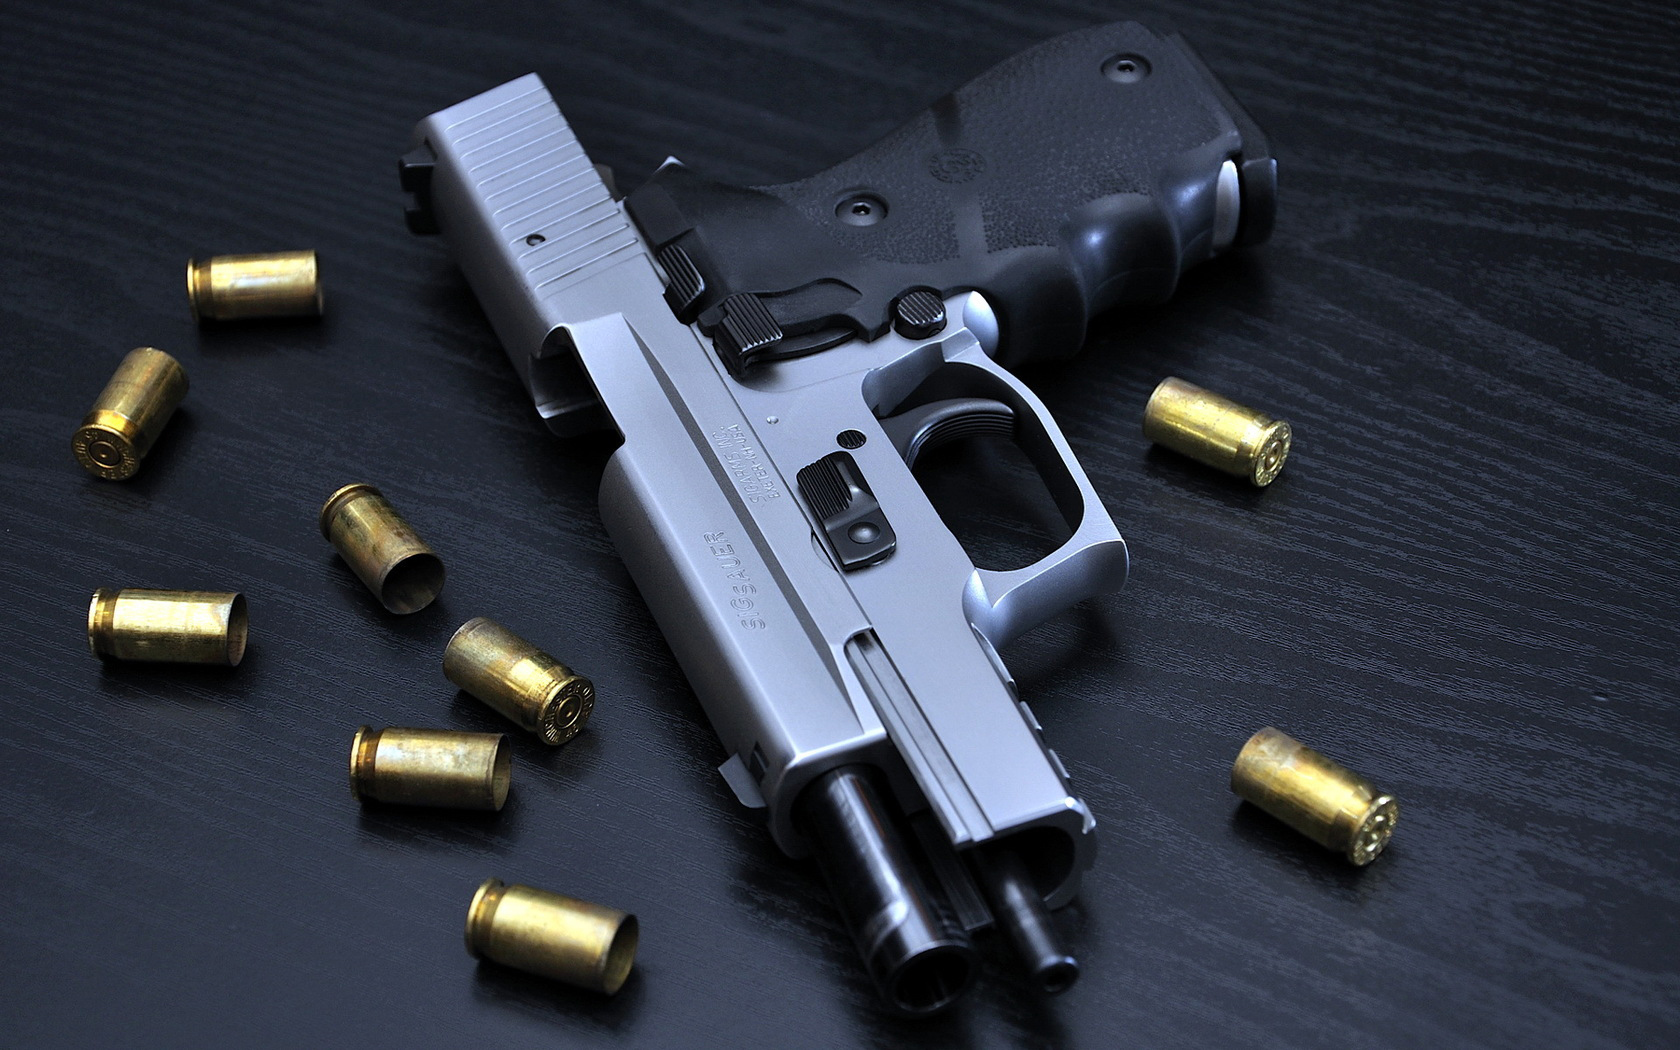 Gallery For Gt Sig Sauer Wallpaper